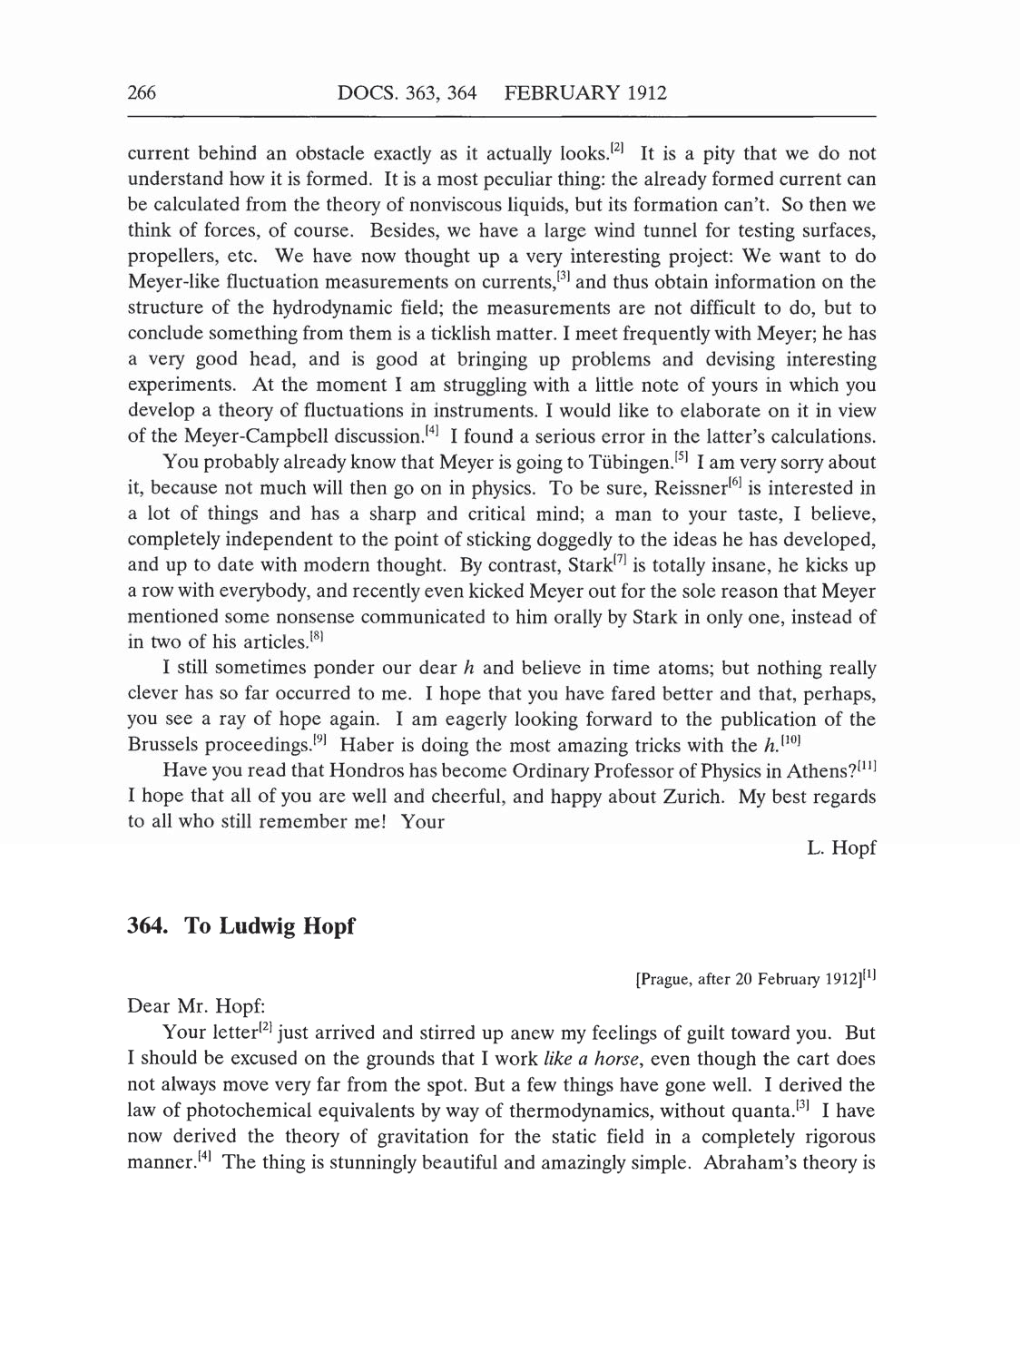 Volume 5: The Swiss Years: Correspondence, 1902-1914 (English translation supplement) page 266